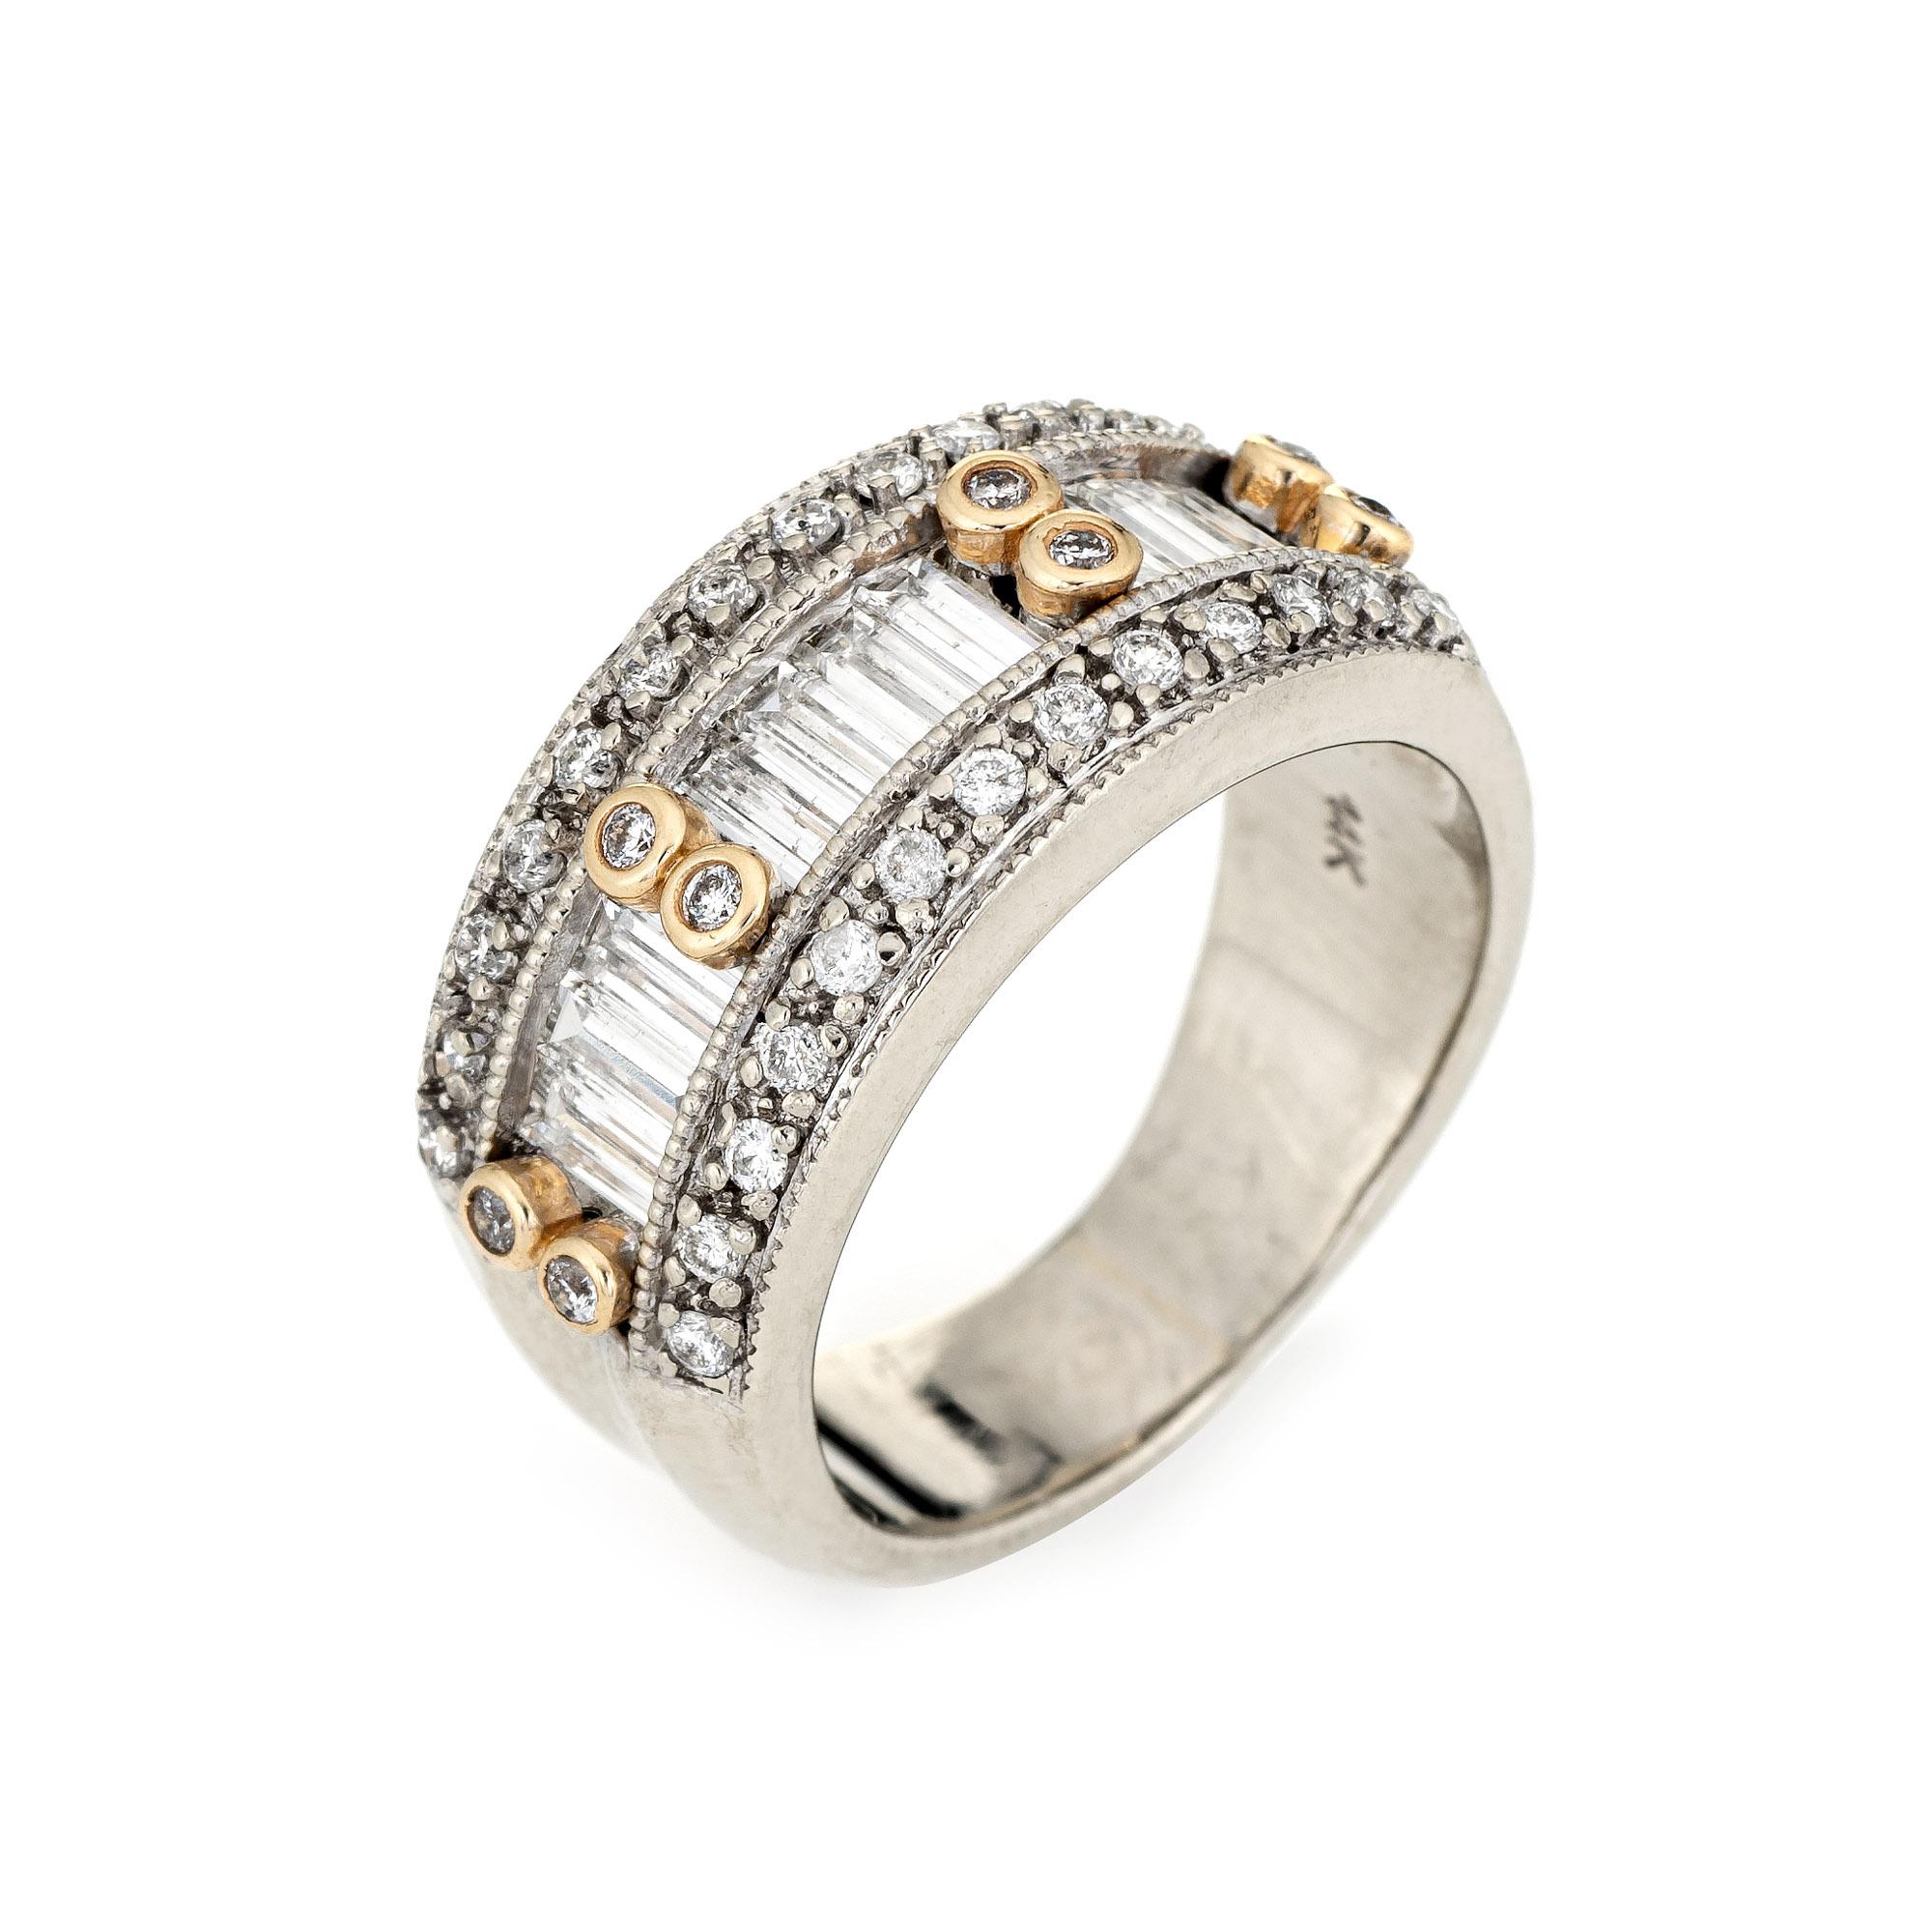 Stylish mixed cut diamond band crafted in 14 karat white gold. 

Round brilliant and straight baguette cut diamonds total an estimated 0.67 carats (estimated at H-I color and VS2-I1 clarity). 

The mixed cut diamonds are set flush into the mount.